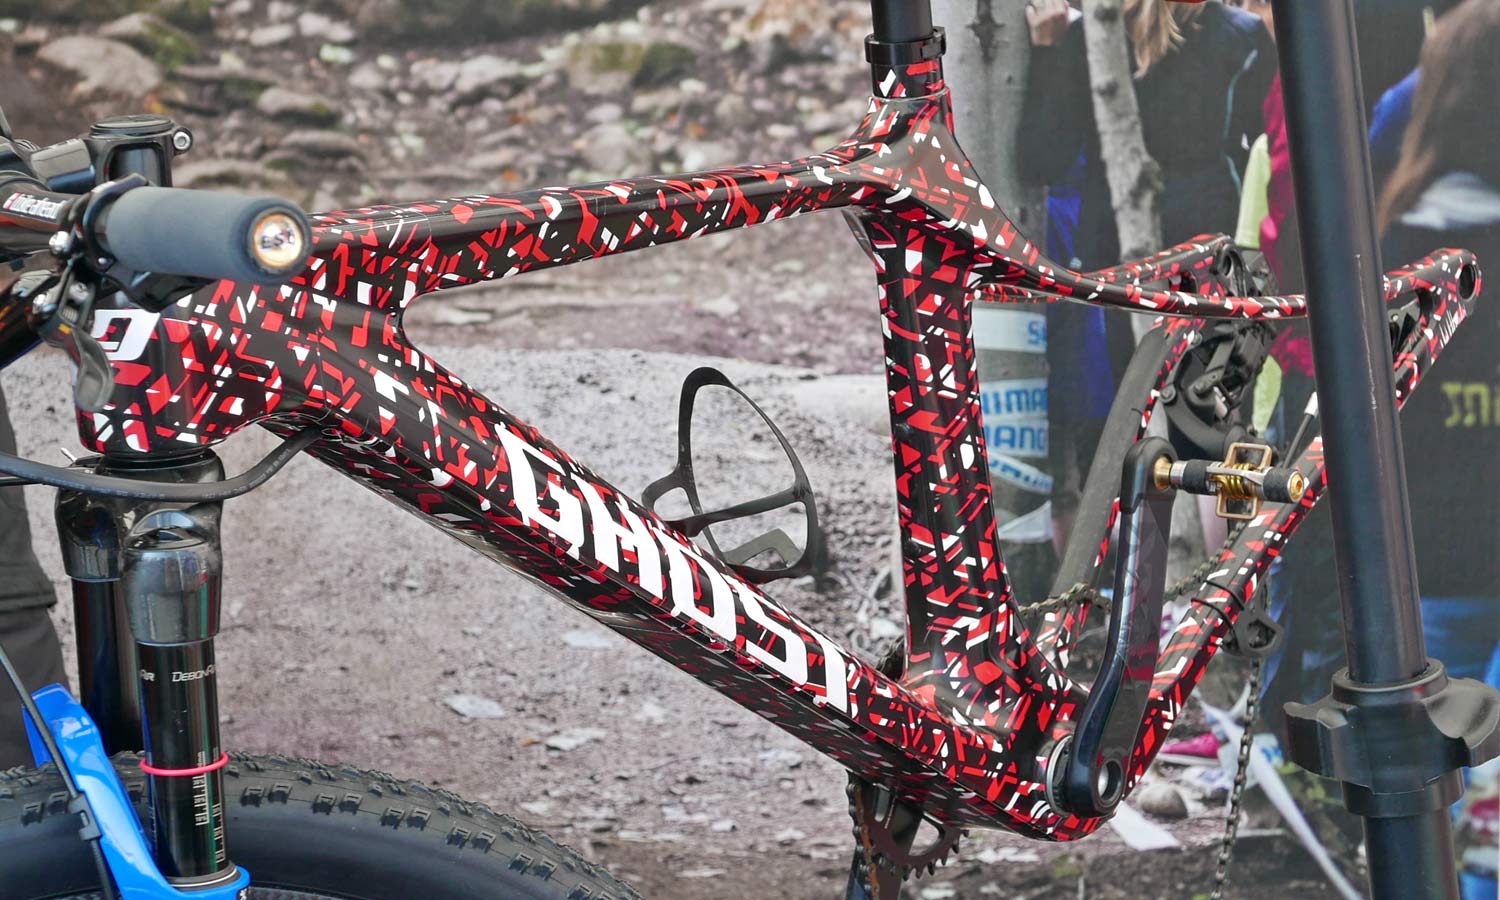 Ghost Lector 2.0 29er prototype carbon XC hardtail with swooping flexy seatstays, cross-country race carbon hardtail mountain bike, Anne Terpstra, Nove Mesto XCO World Cup racing